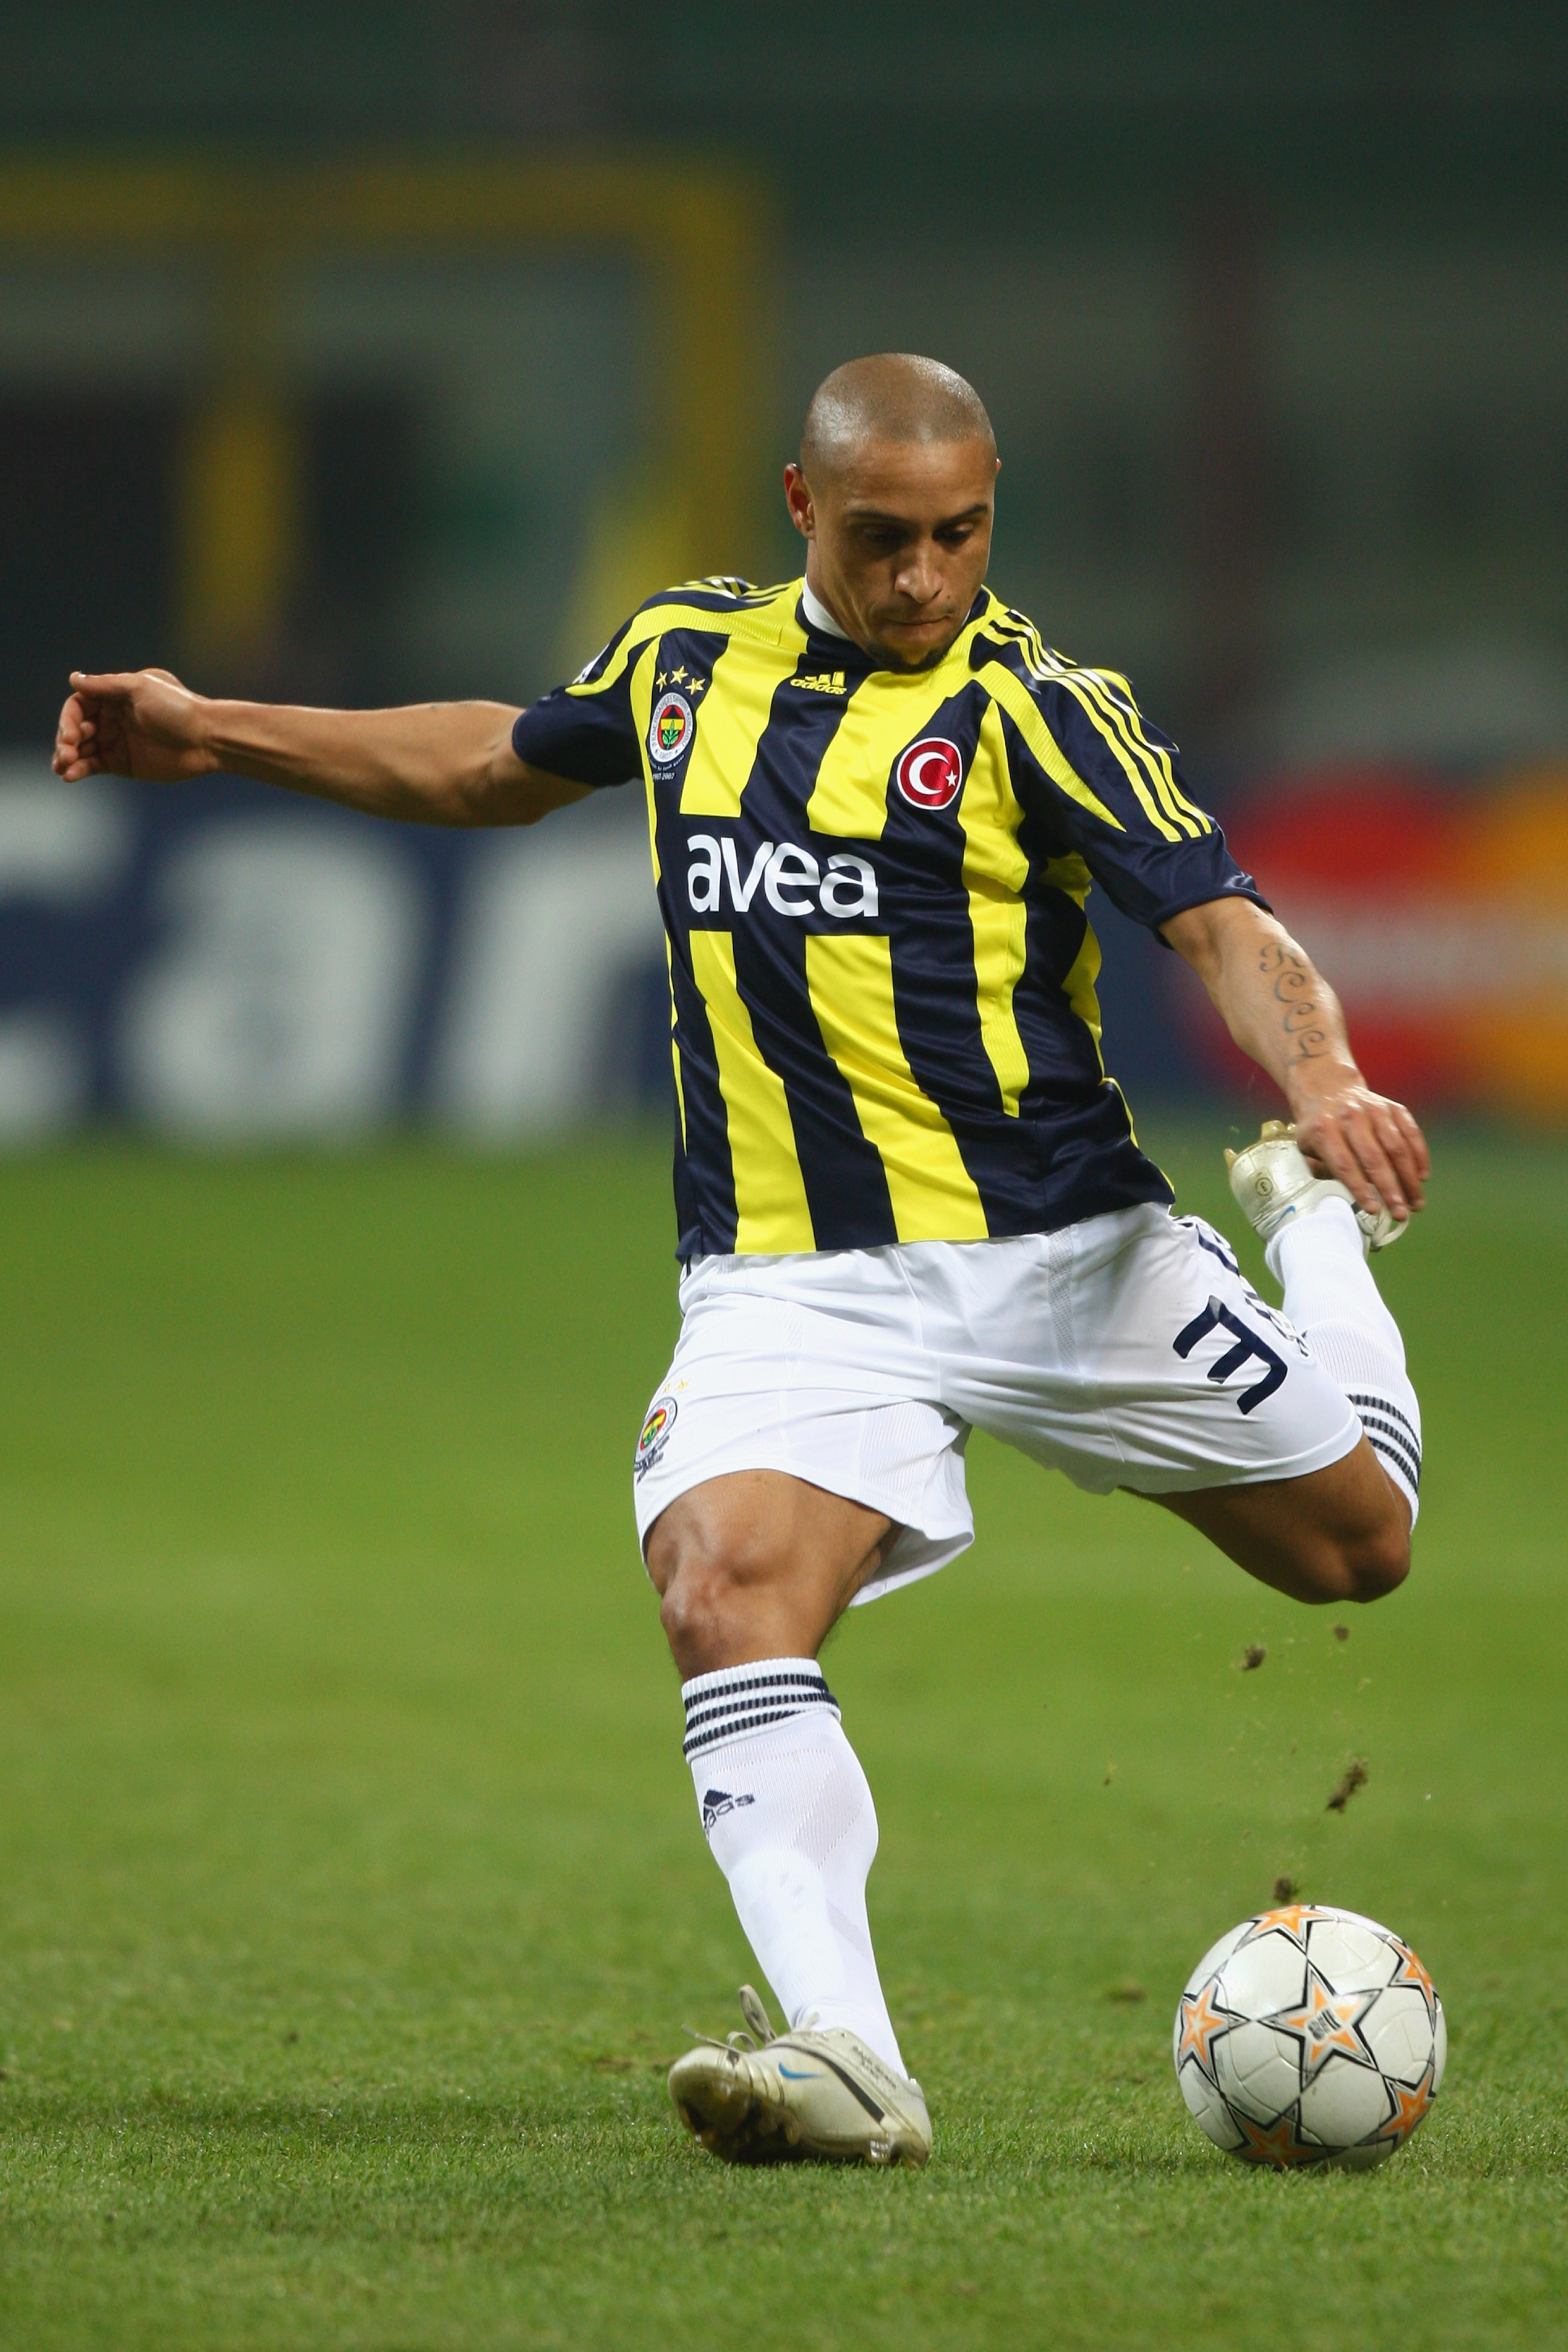 MILAN, ITALY - NOVEMBER 27:  Roberto Carlos of Fenerbahce during the UEFA Champions League Group G match between Inter Milan and Fenerbahce at the San Siro stadium on November 27, 2007 in Milan,Italy.  (Photo by Michael Steele/Getty Images)